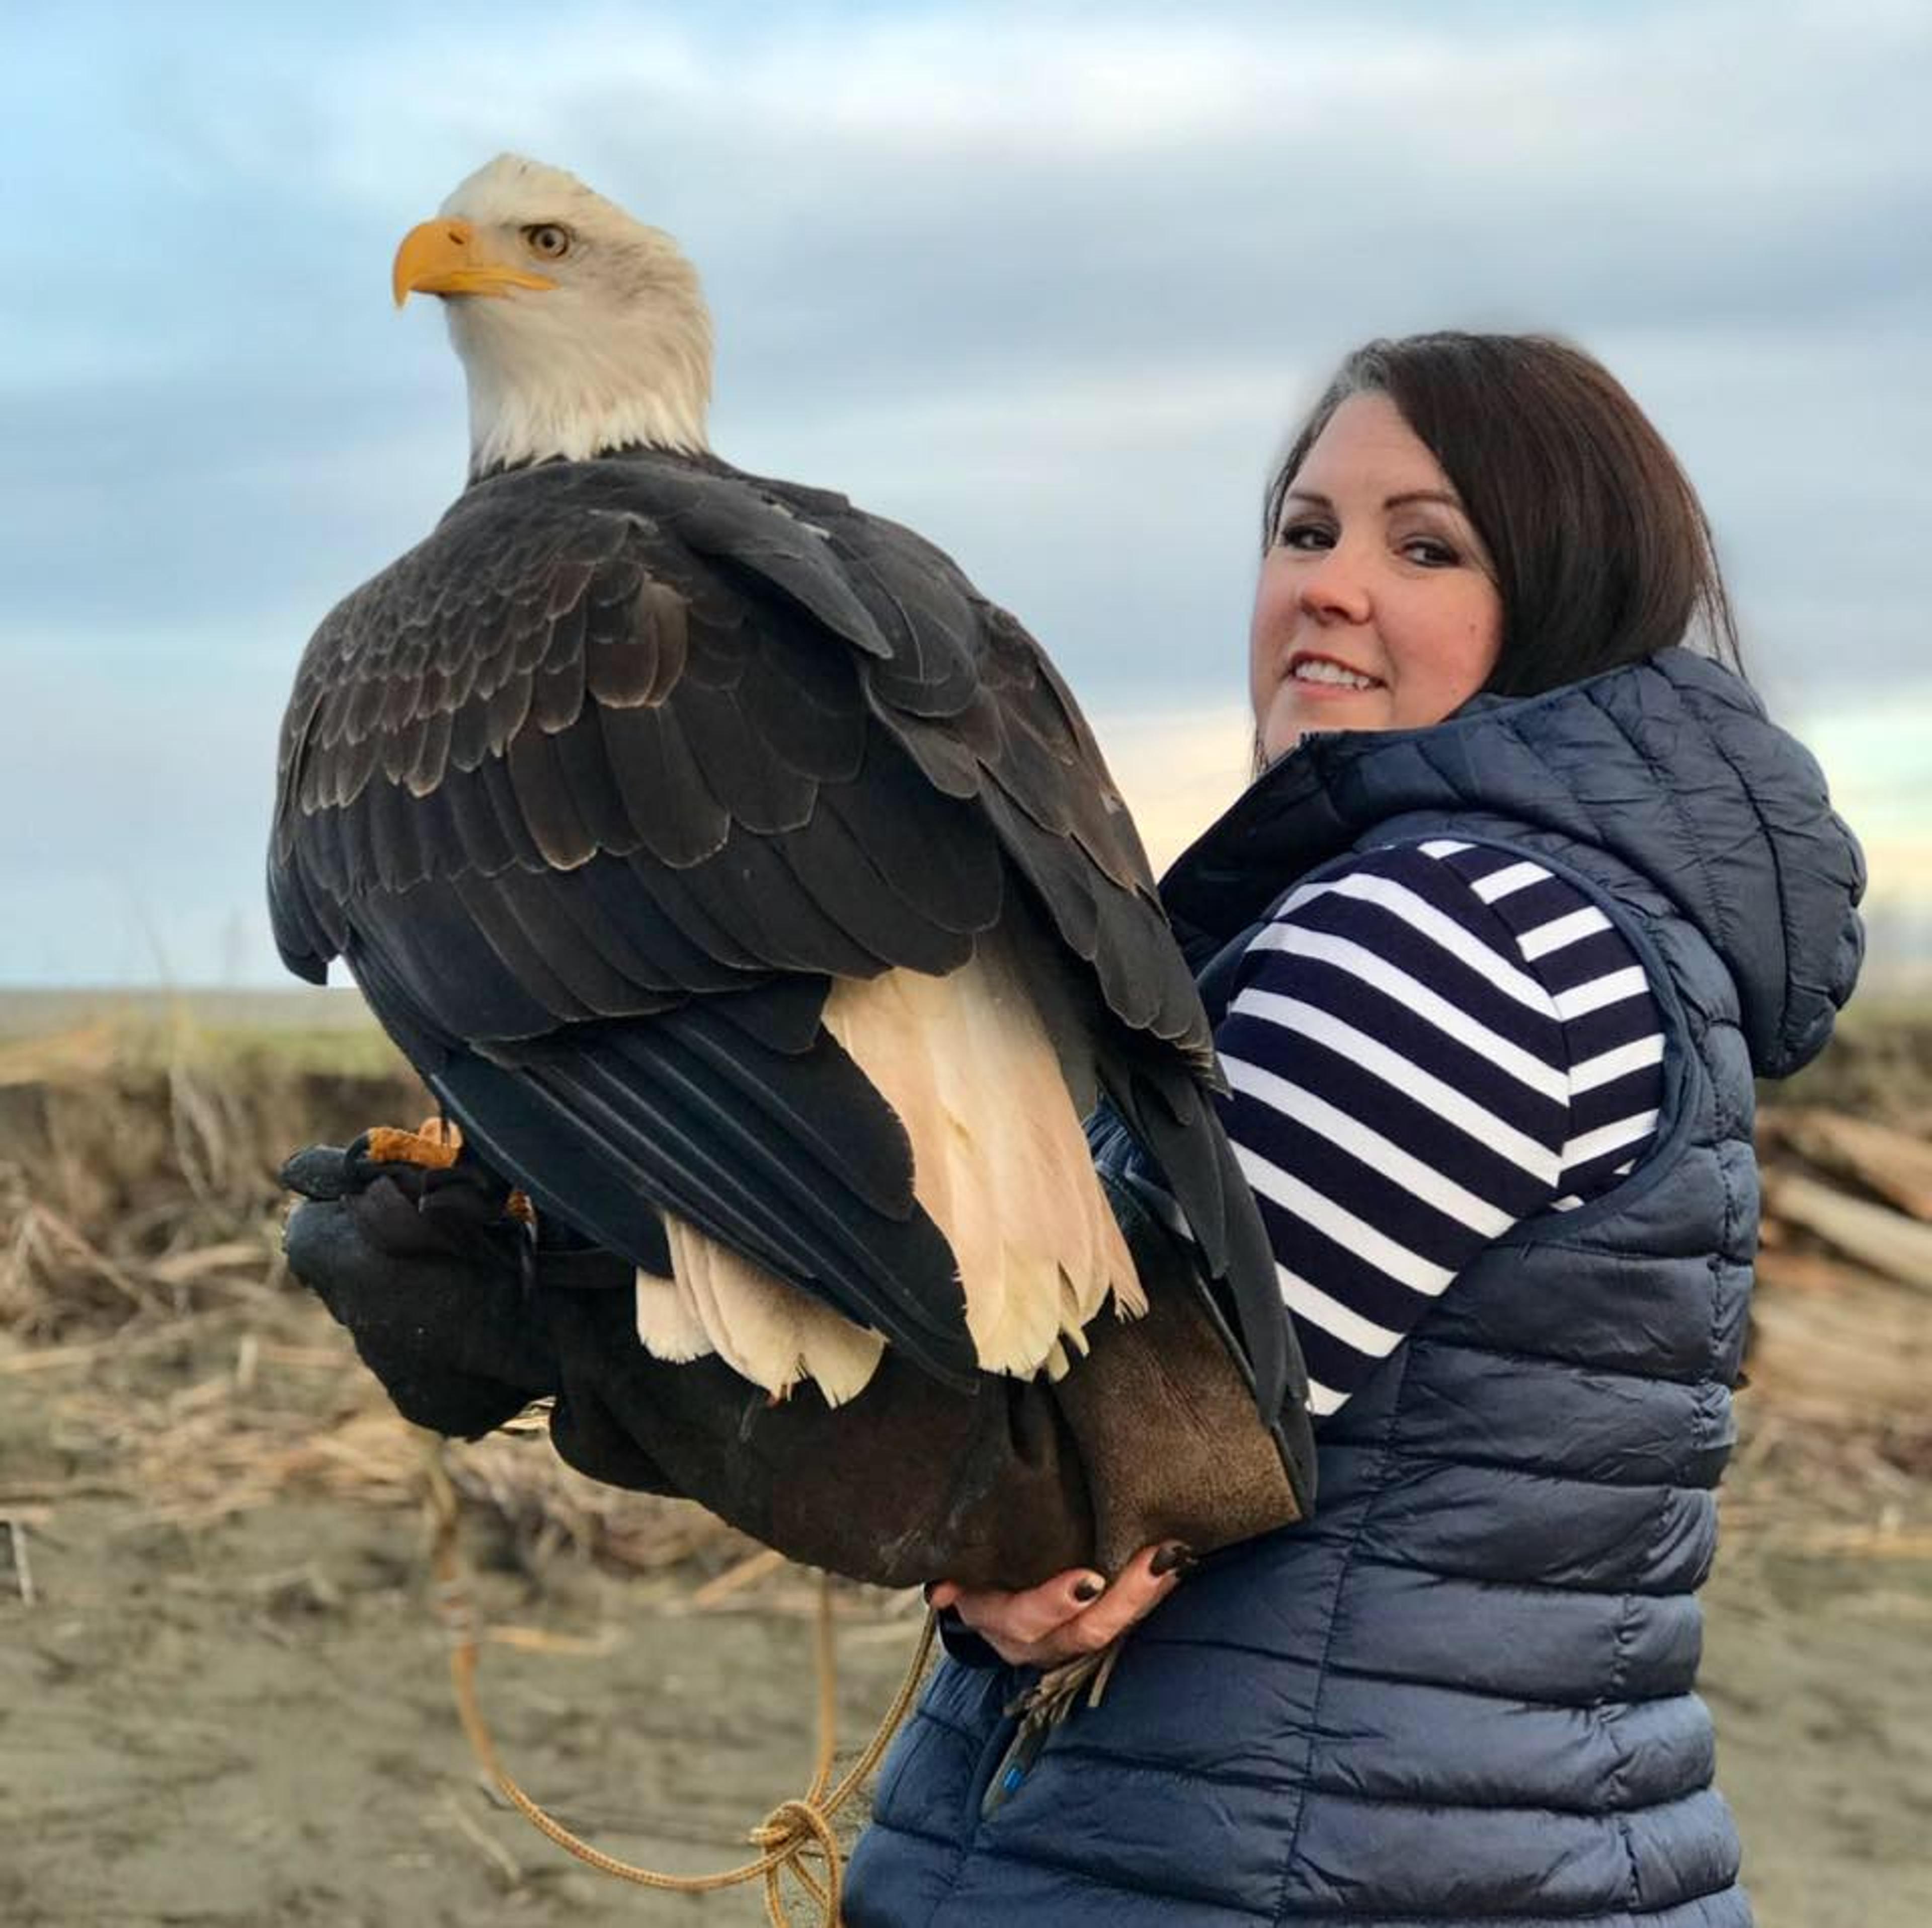 Woman stands with a bald eagle on her glove